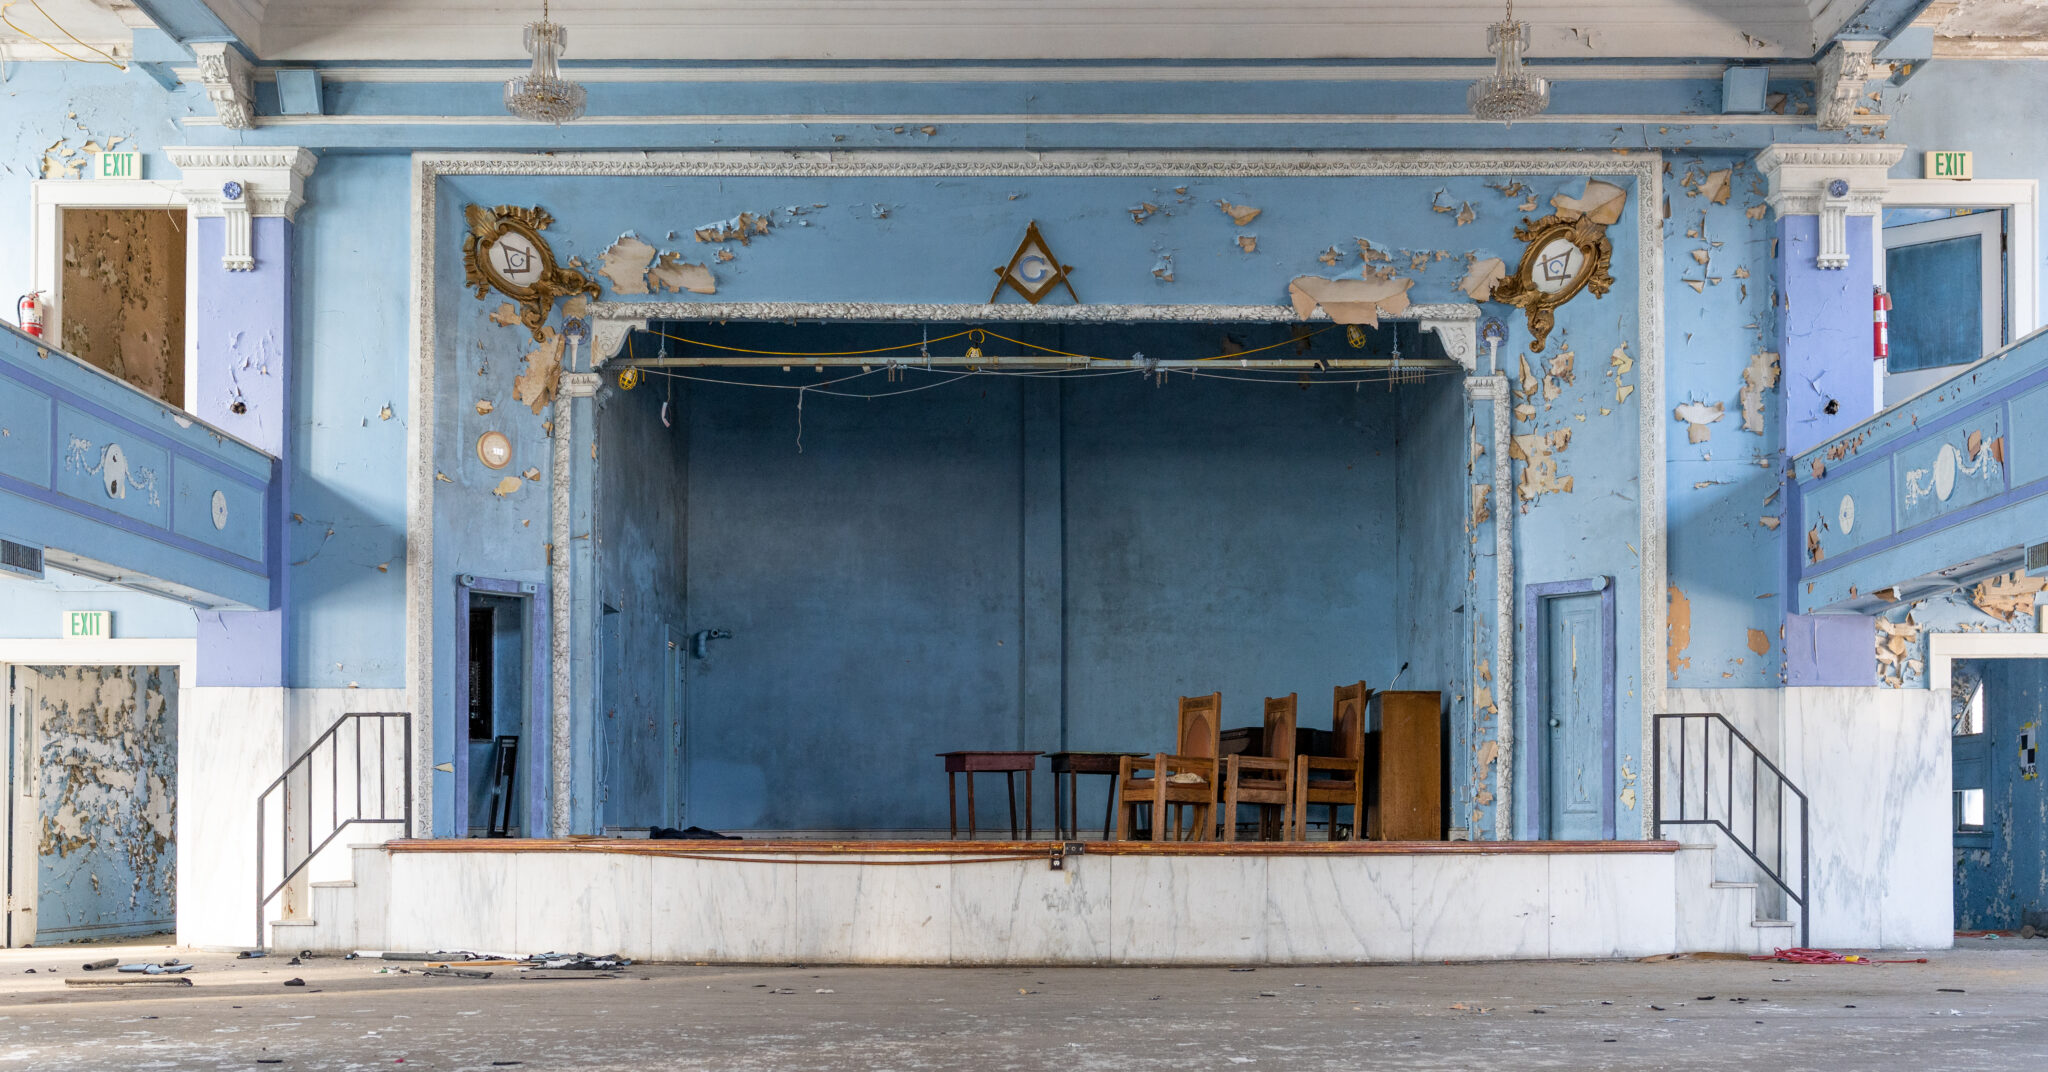 Prince Hall 1 $29M renovation underway for Masonic Temple Building [details + exclusive look]